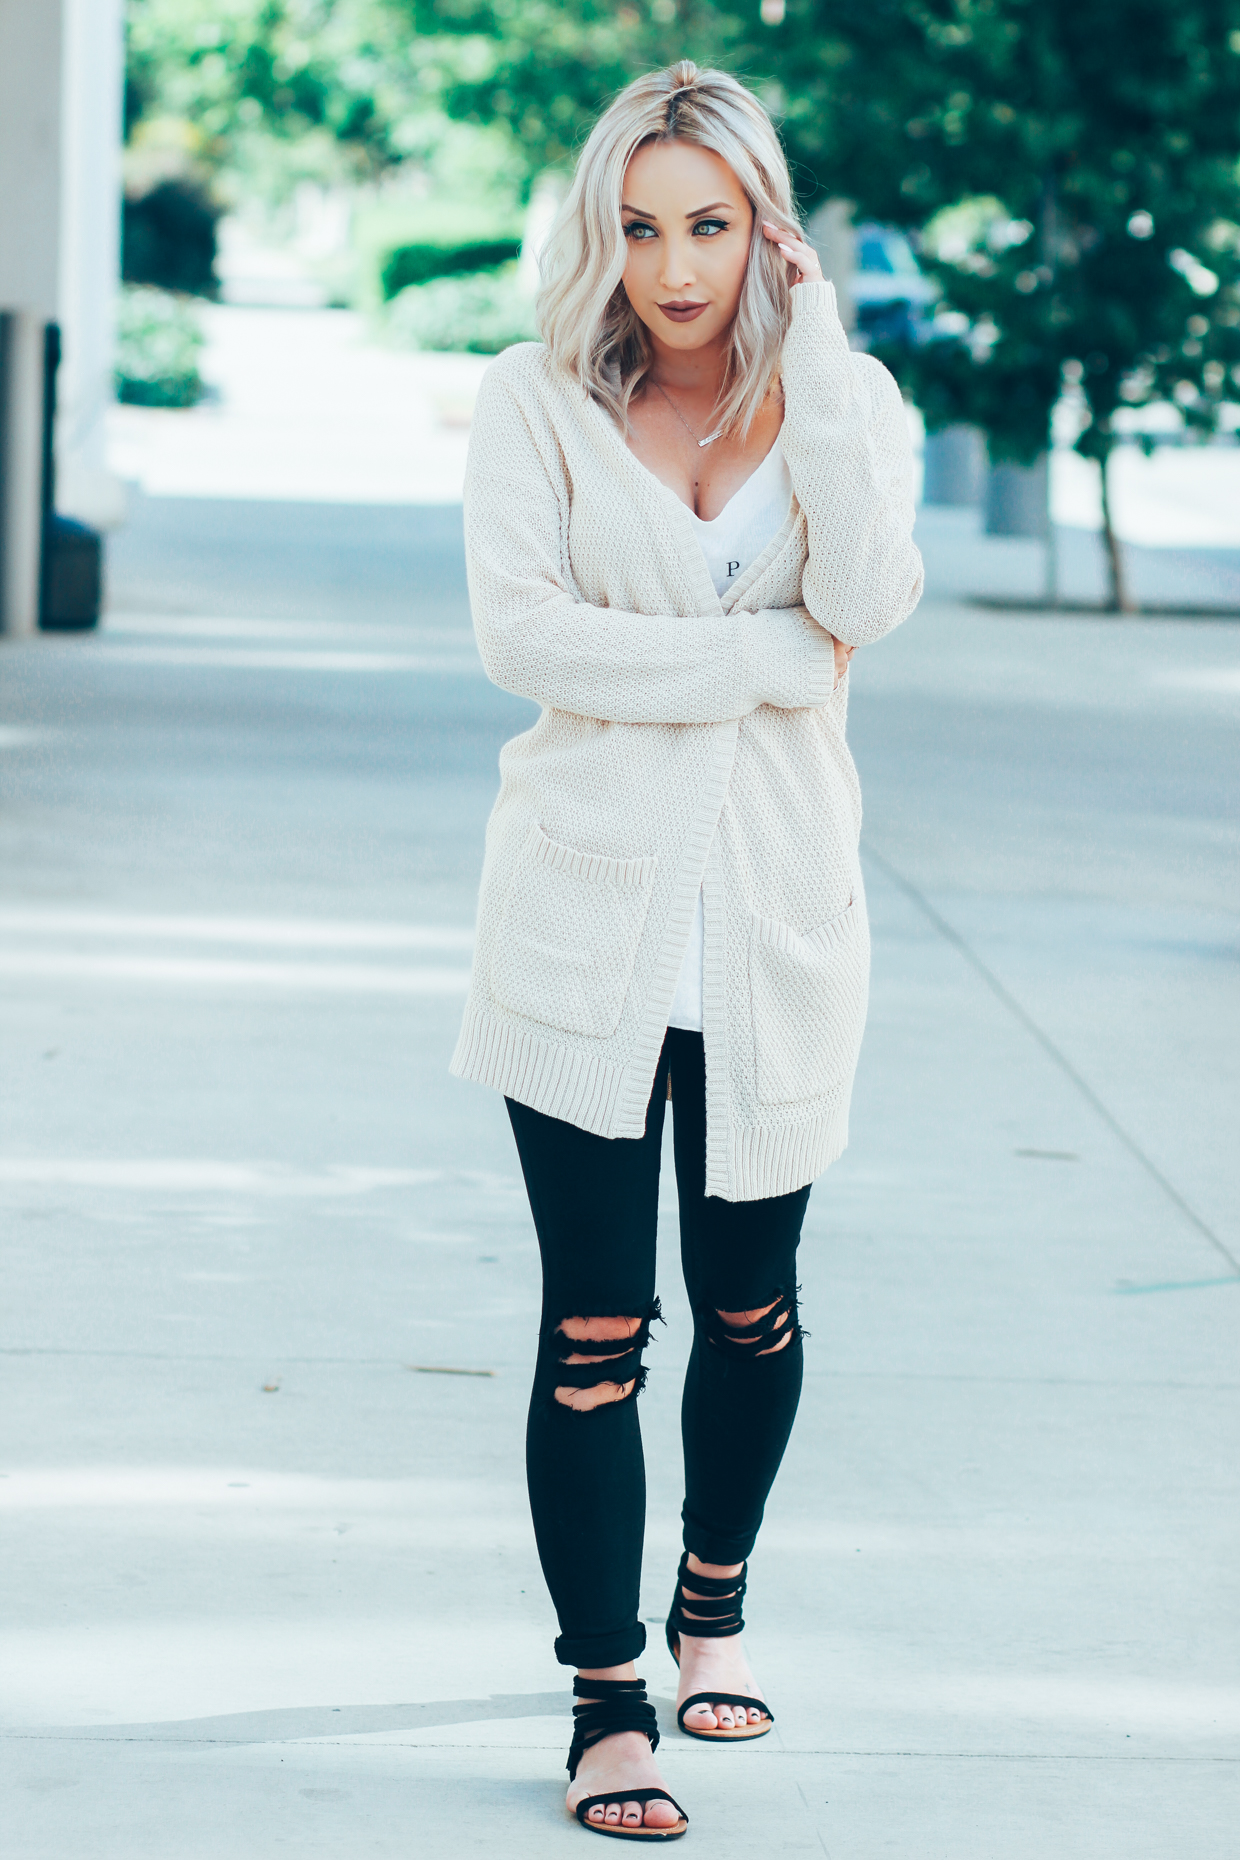 Blondie in the City | Casual #OOTD | Distressed Jeans | Ivory Cardigan @urbanoutfitters